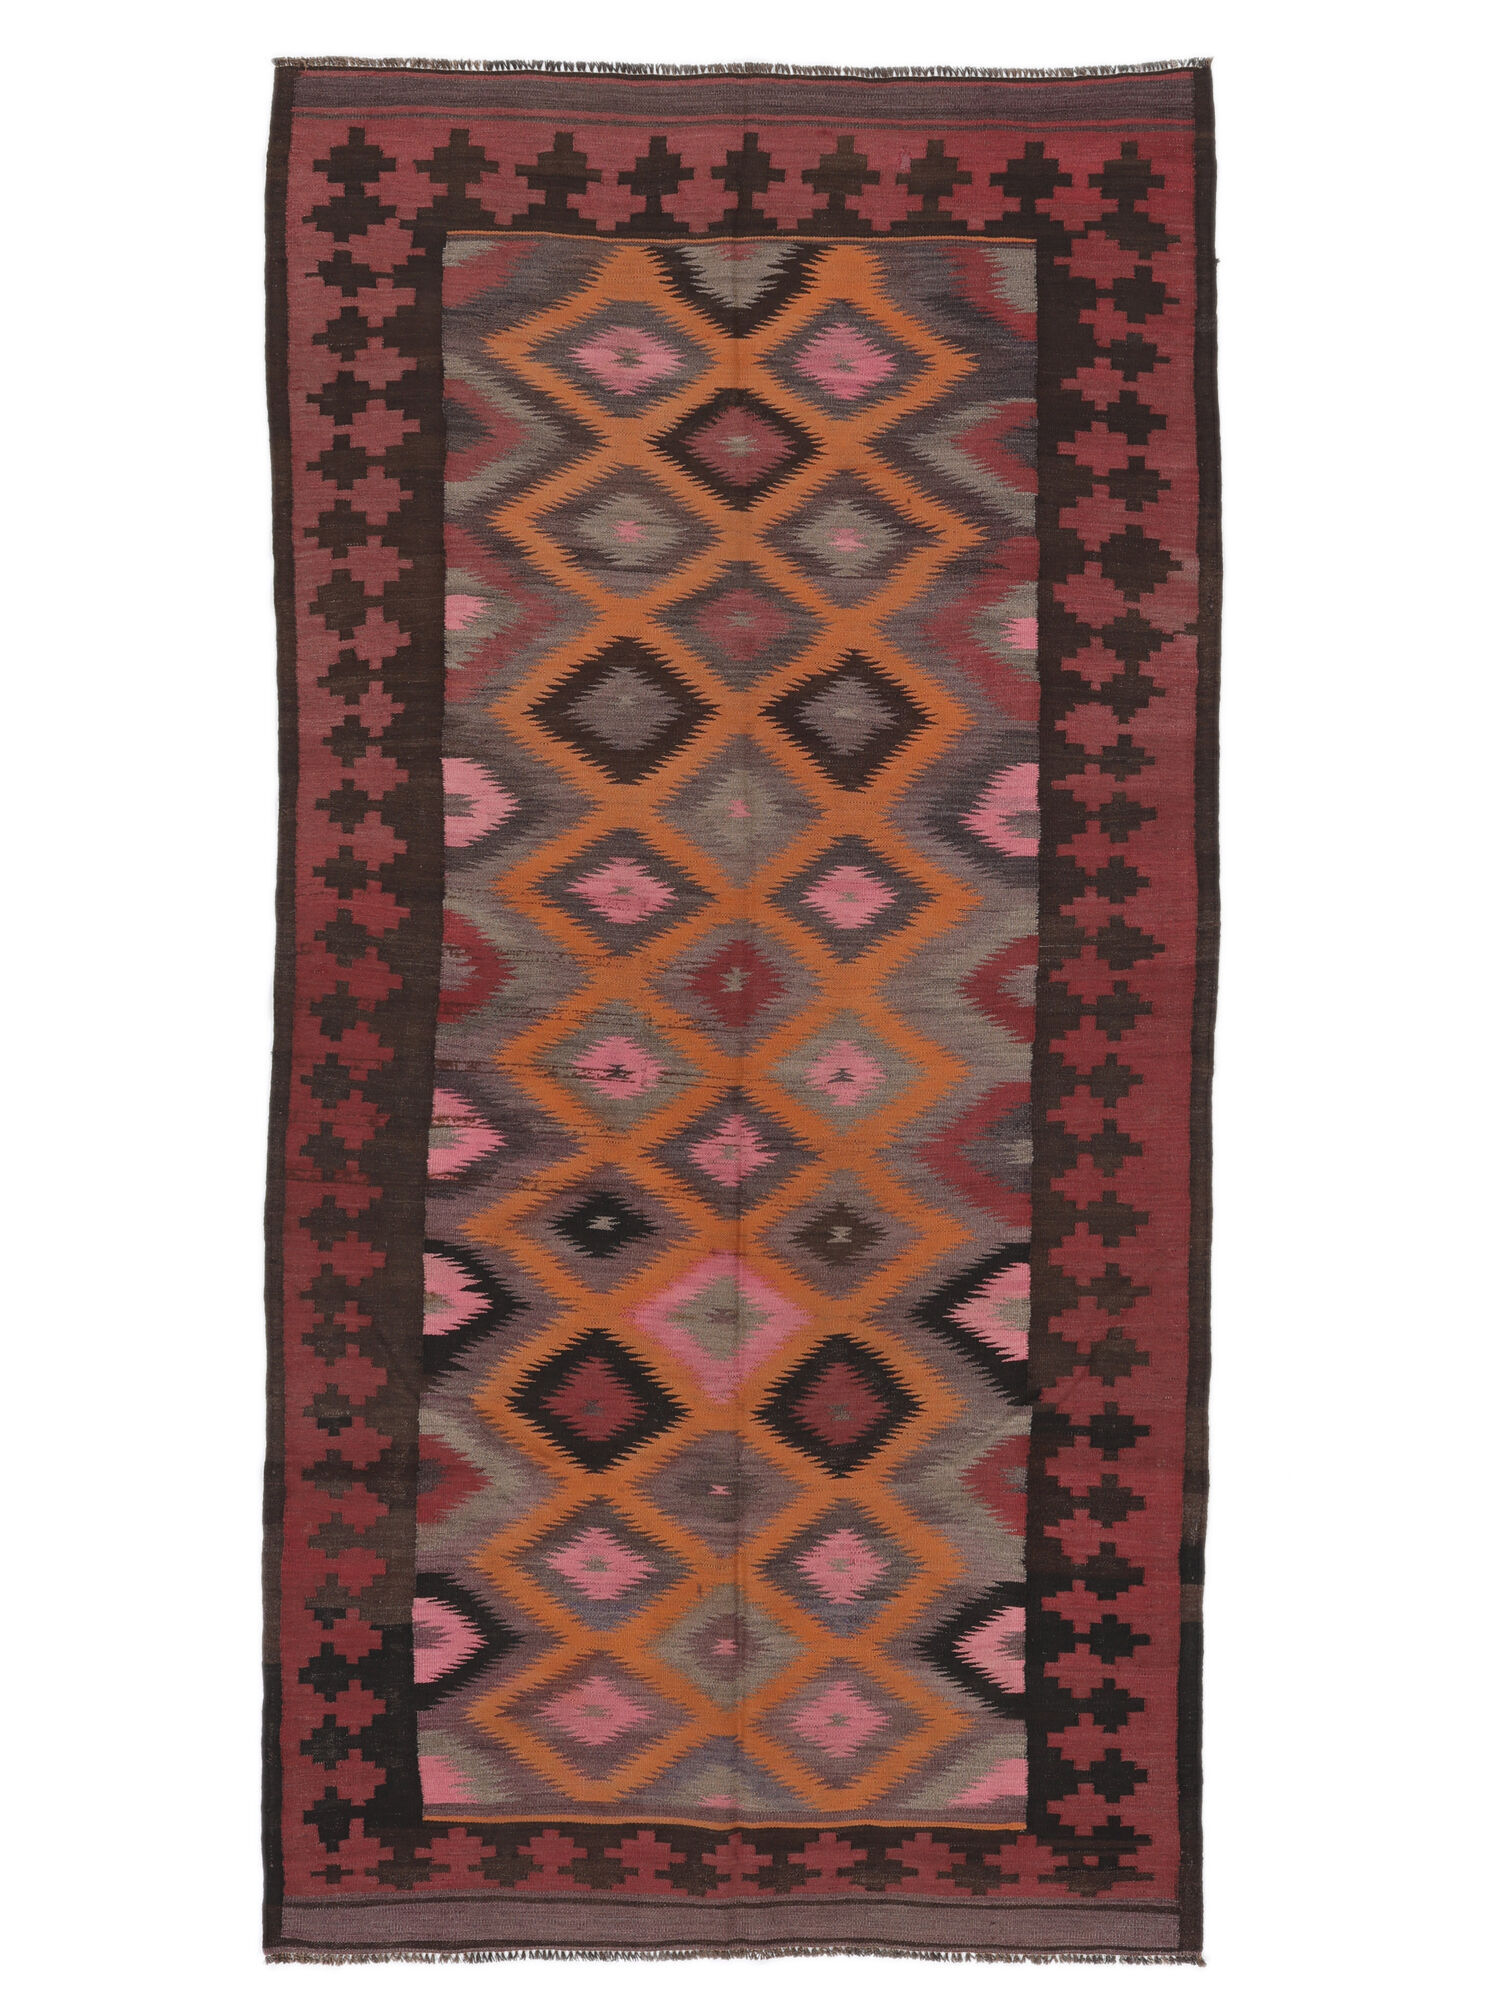 Annodato a mano. Provenienza: Afghanistan Afghan Vintage Kilim Tappeto 160x322